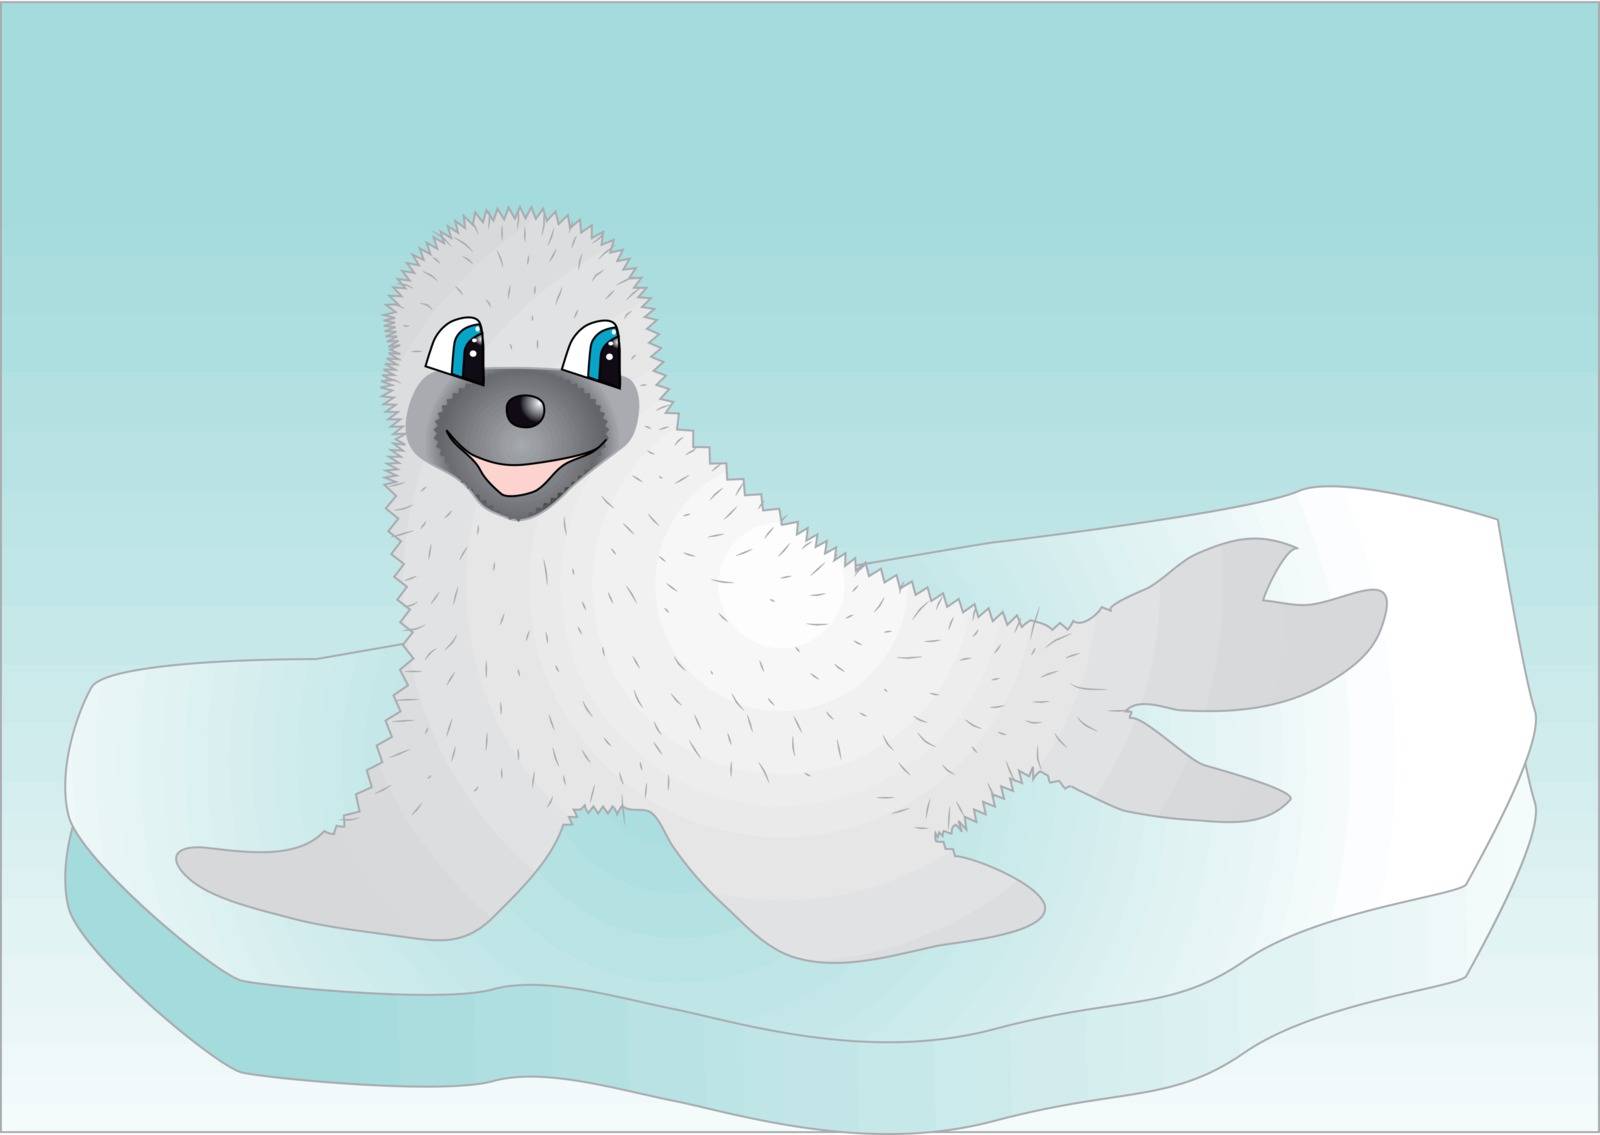 Seal on ice by arkela